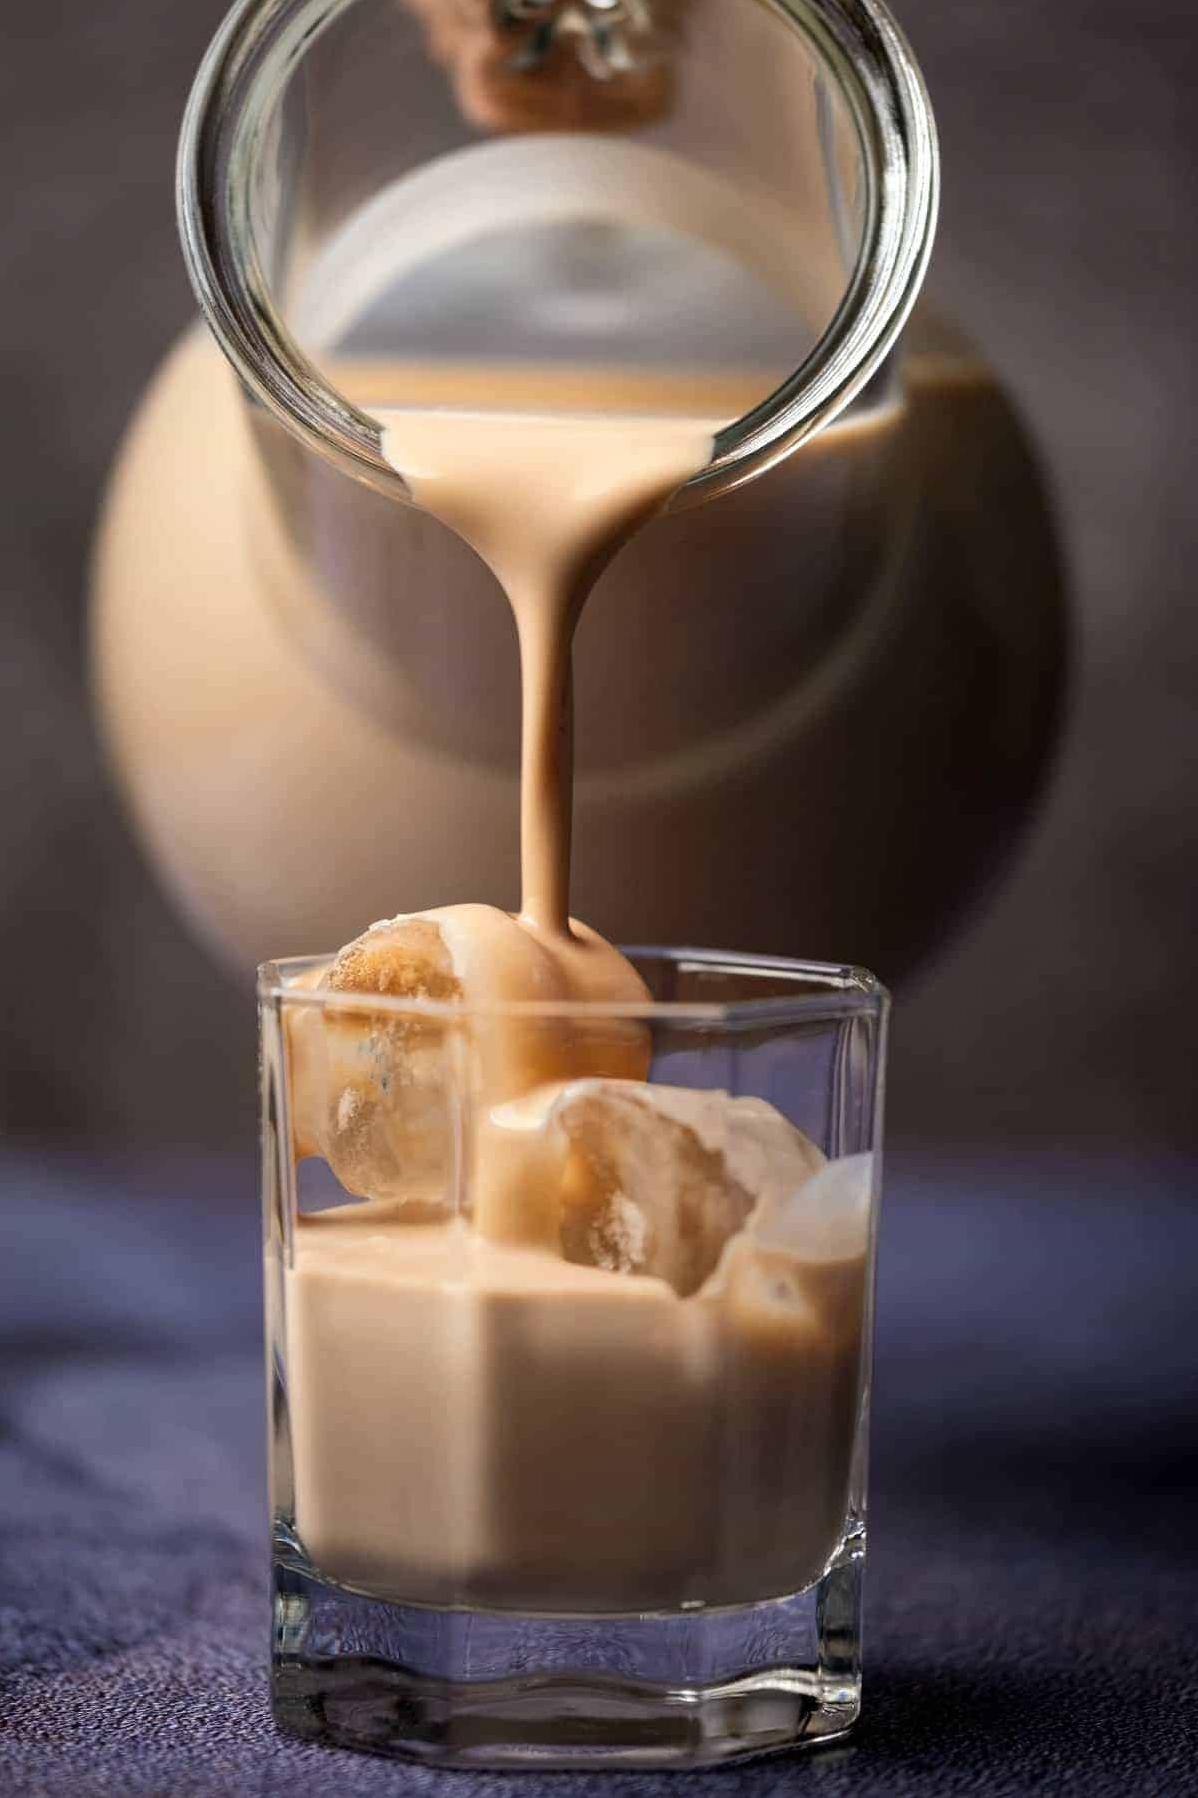  Customize the flavor of your Irish cream by adding different extracts or spices.